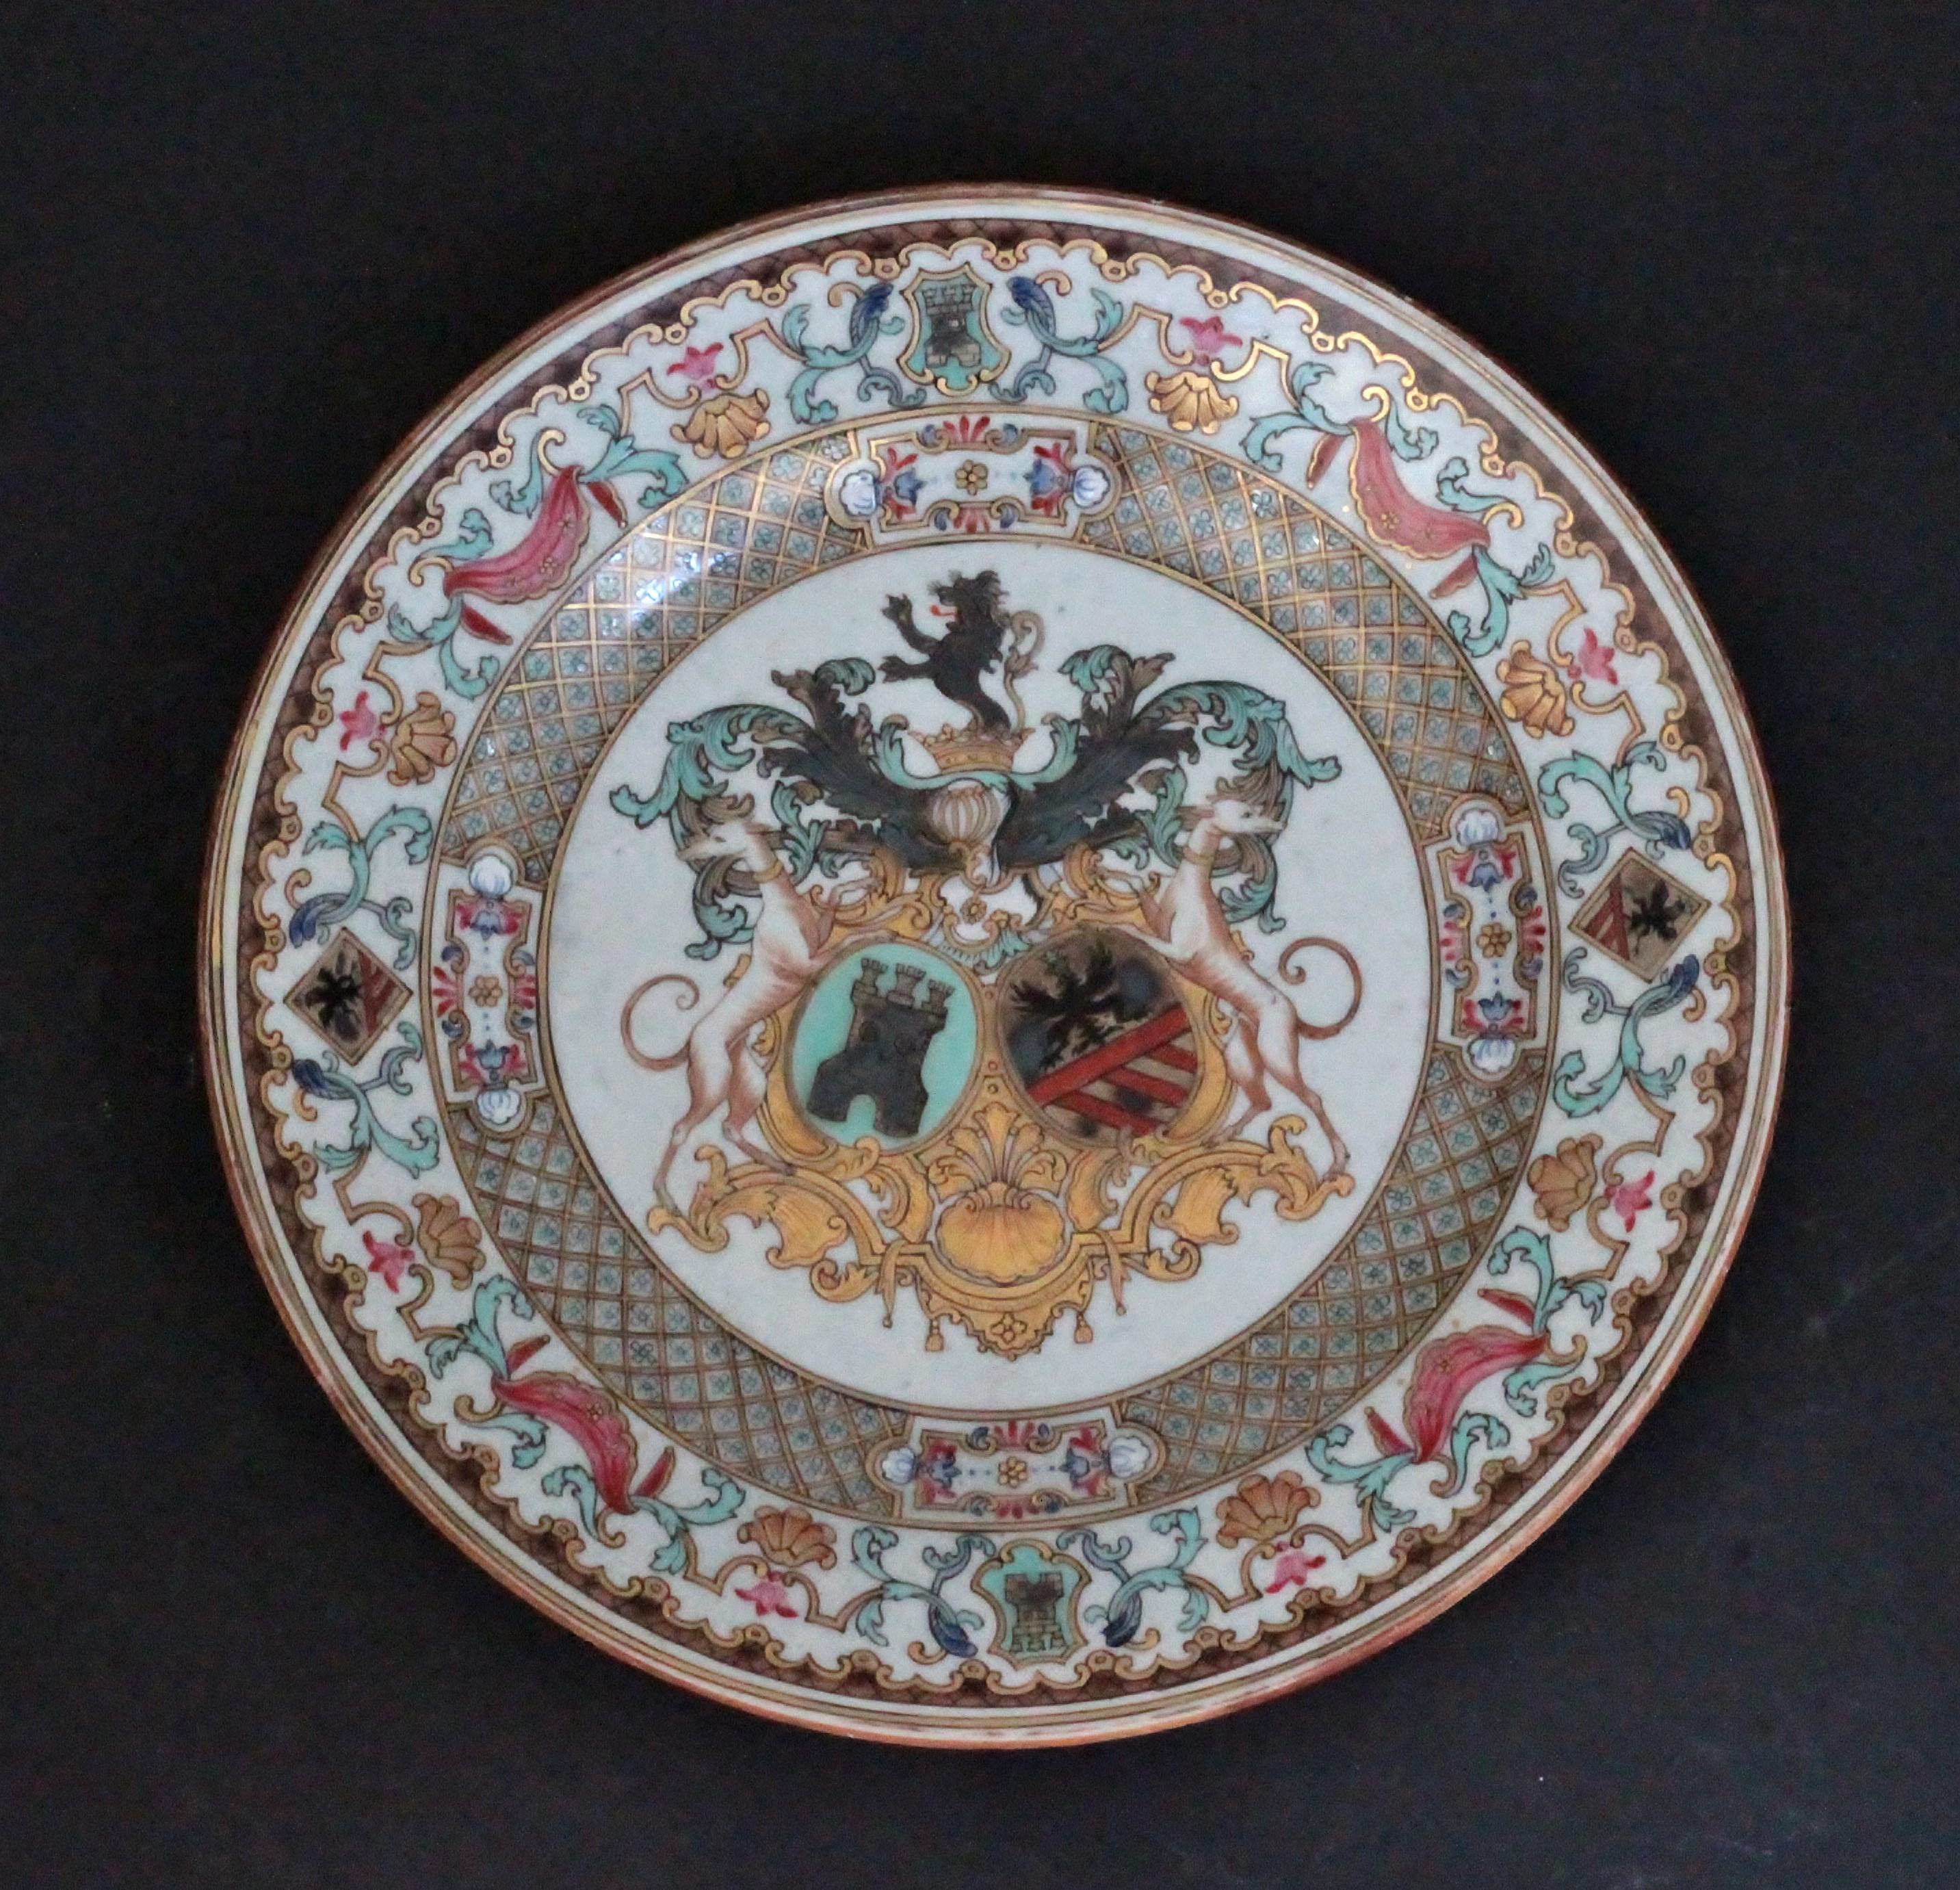 A large armorial plate in China porcelain decorated of Famille Rose enamels with double coat of arms of Bistrate-de-Proli, Belgian market. There are a lion and a greyhound, embellished in gilt and silver.
Yongzheng period (1723-1735), circa